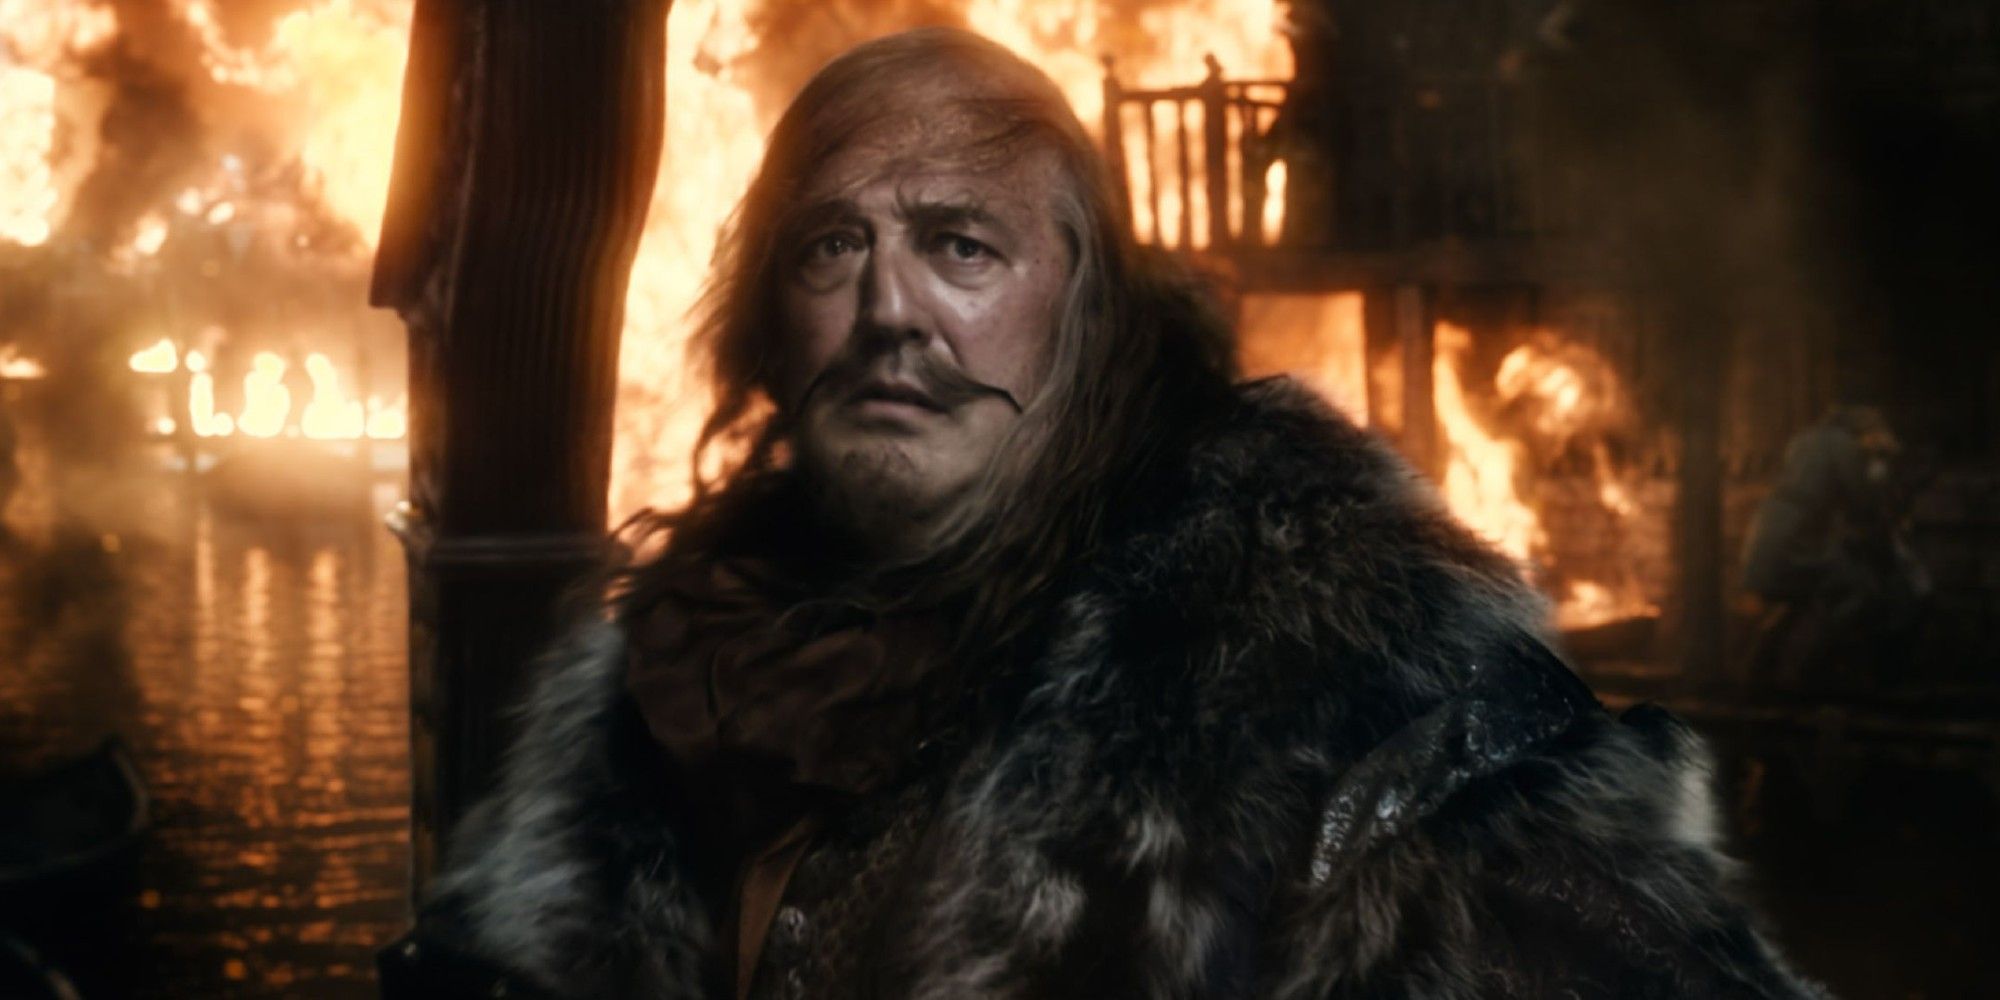 Stephen Fry in The Hobbit The Battle Of The Five Armies